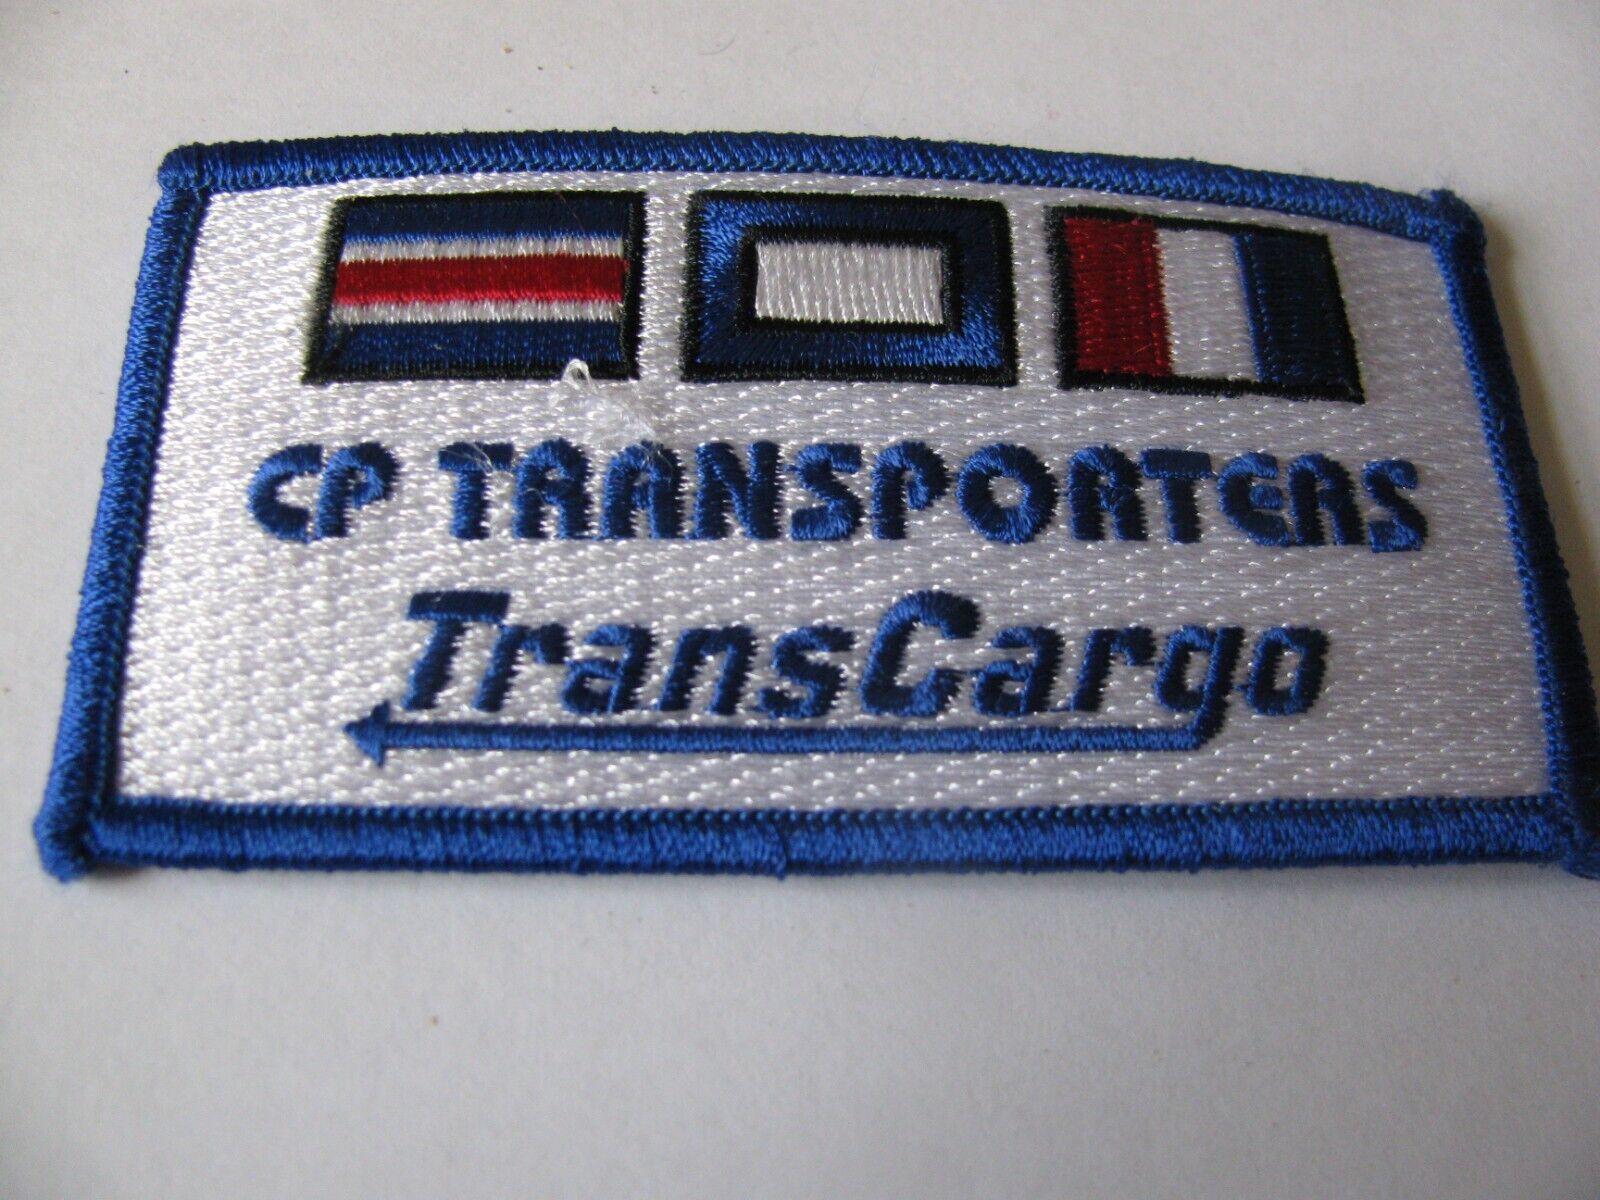 CP TRANSPORTERS TRANSCARGO  Trucking Company  Compton  CA  Patch Iron On 4” Rare